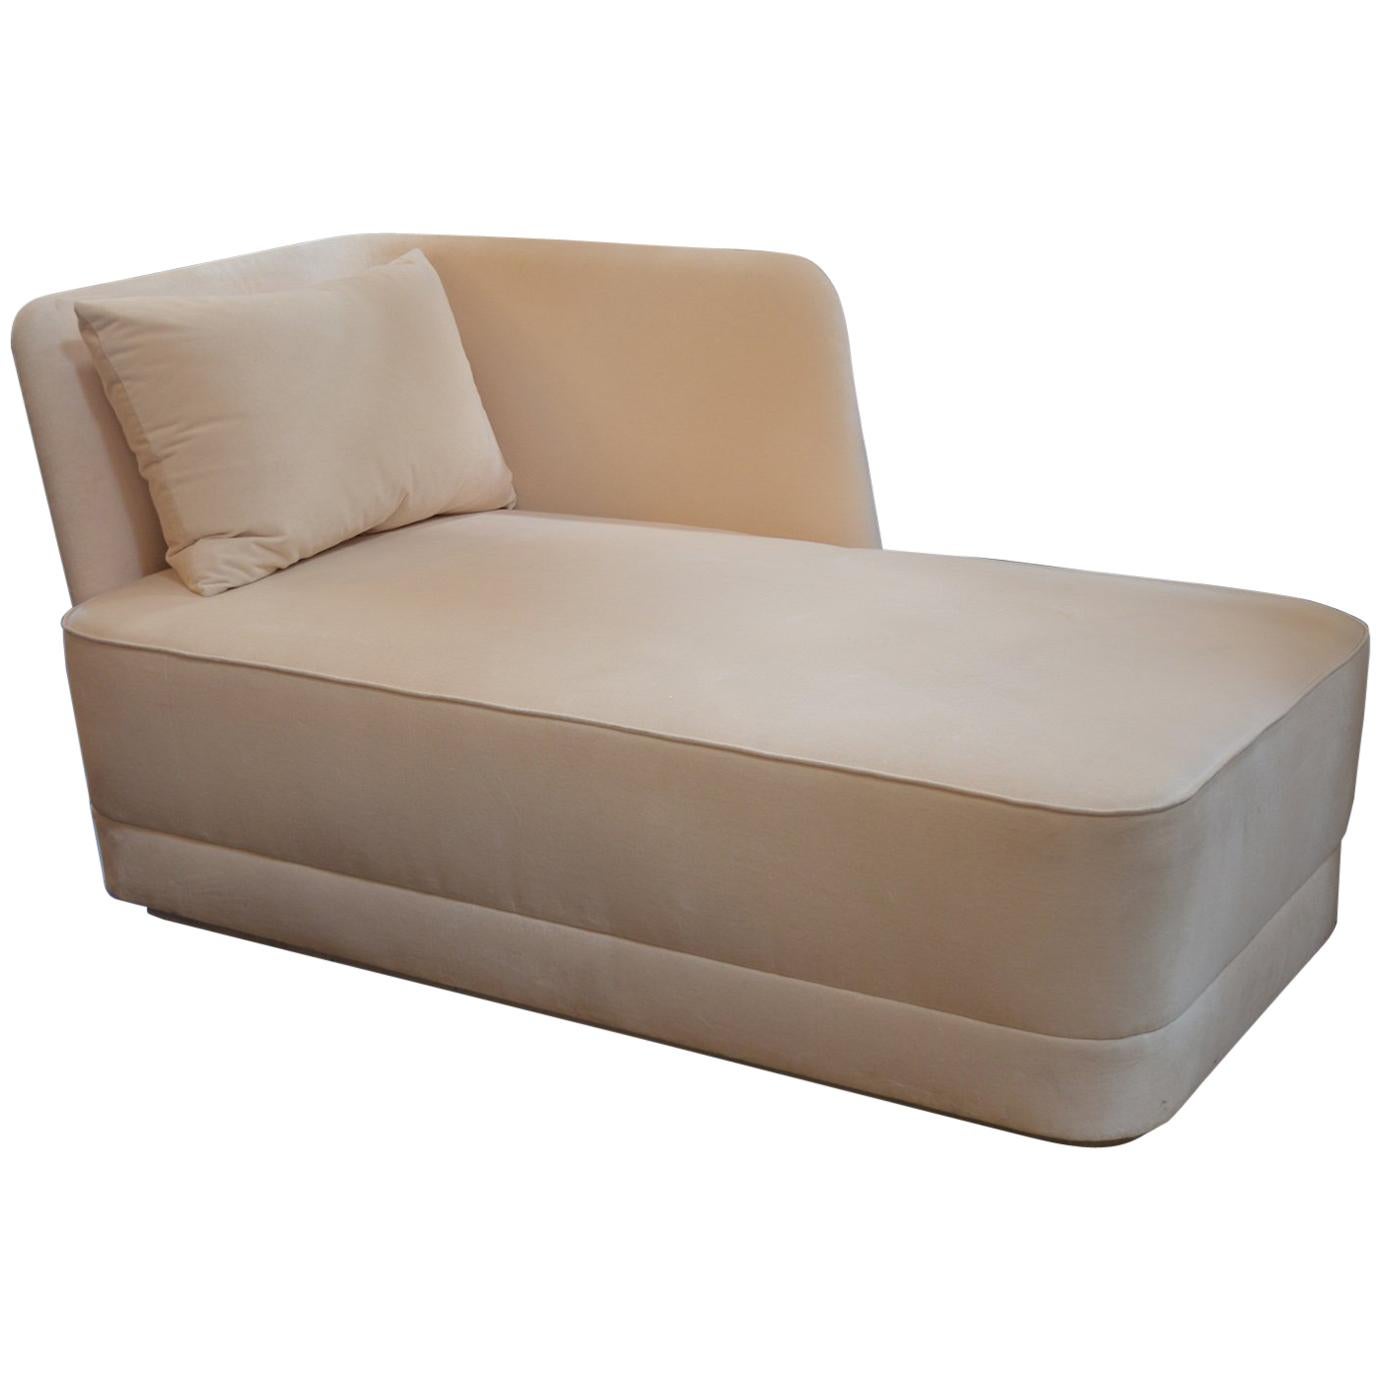 Velvet and Leather Chaise Longue